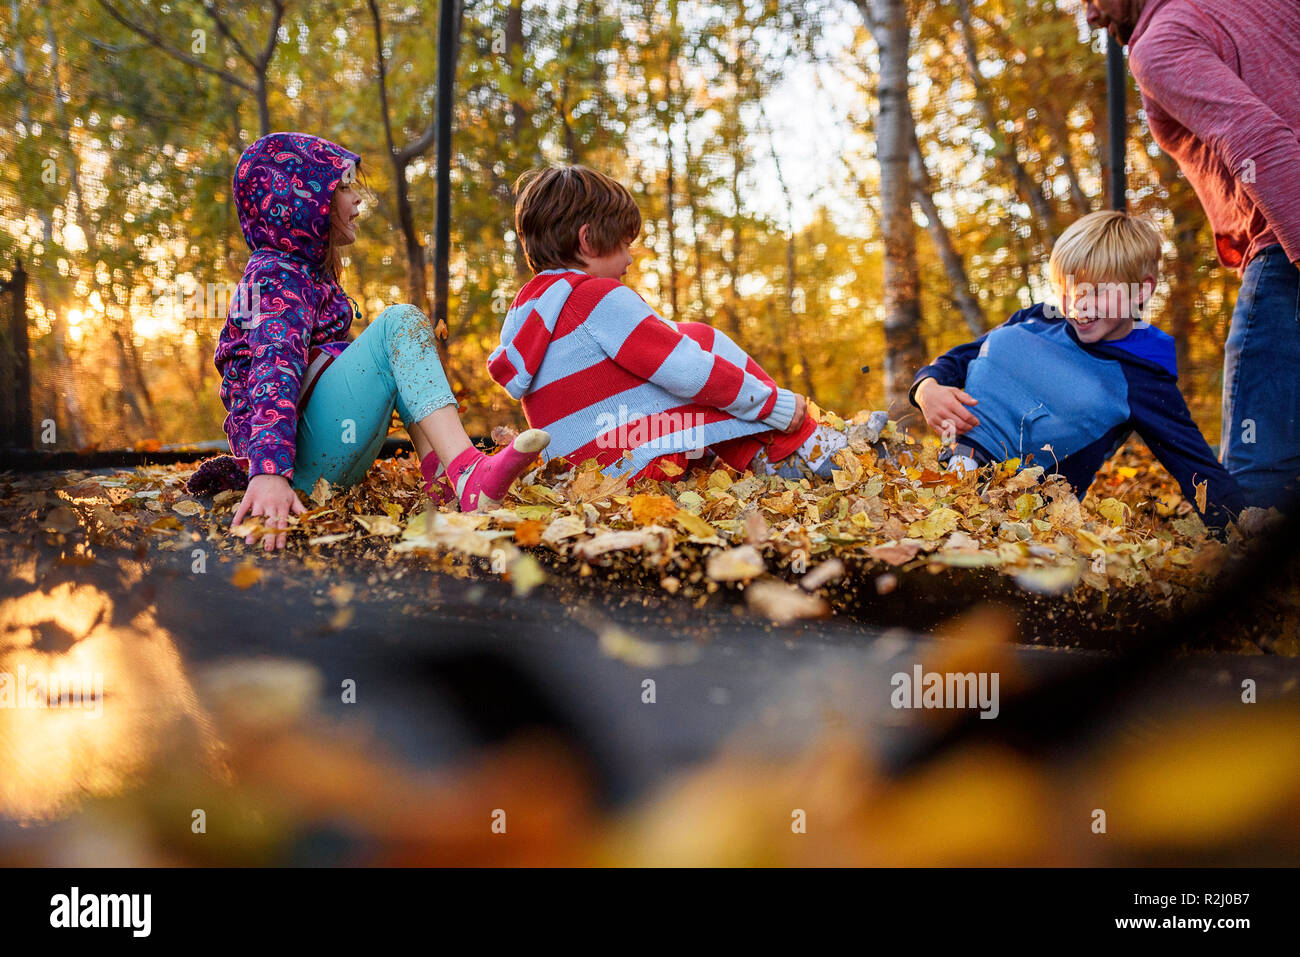 Three children and their father playing on a trampoline covered in autumn leaves, United States Stock Photo